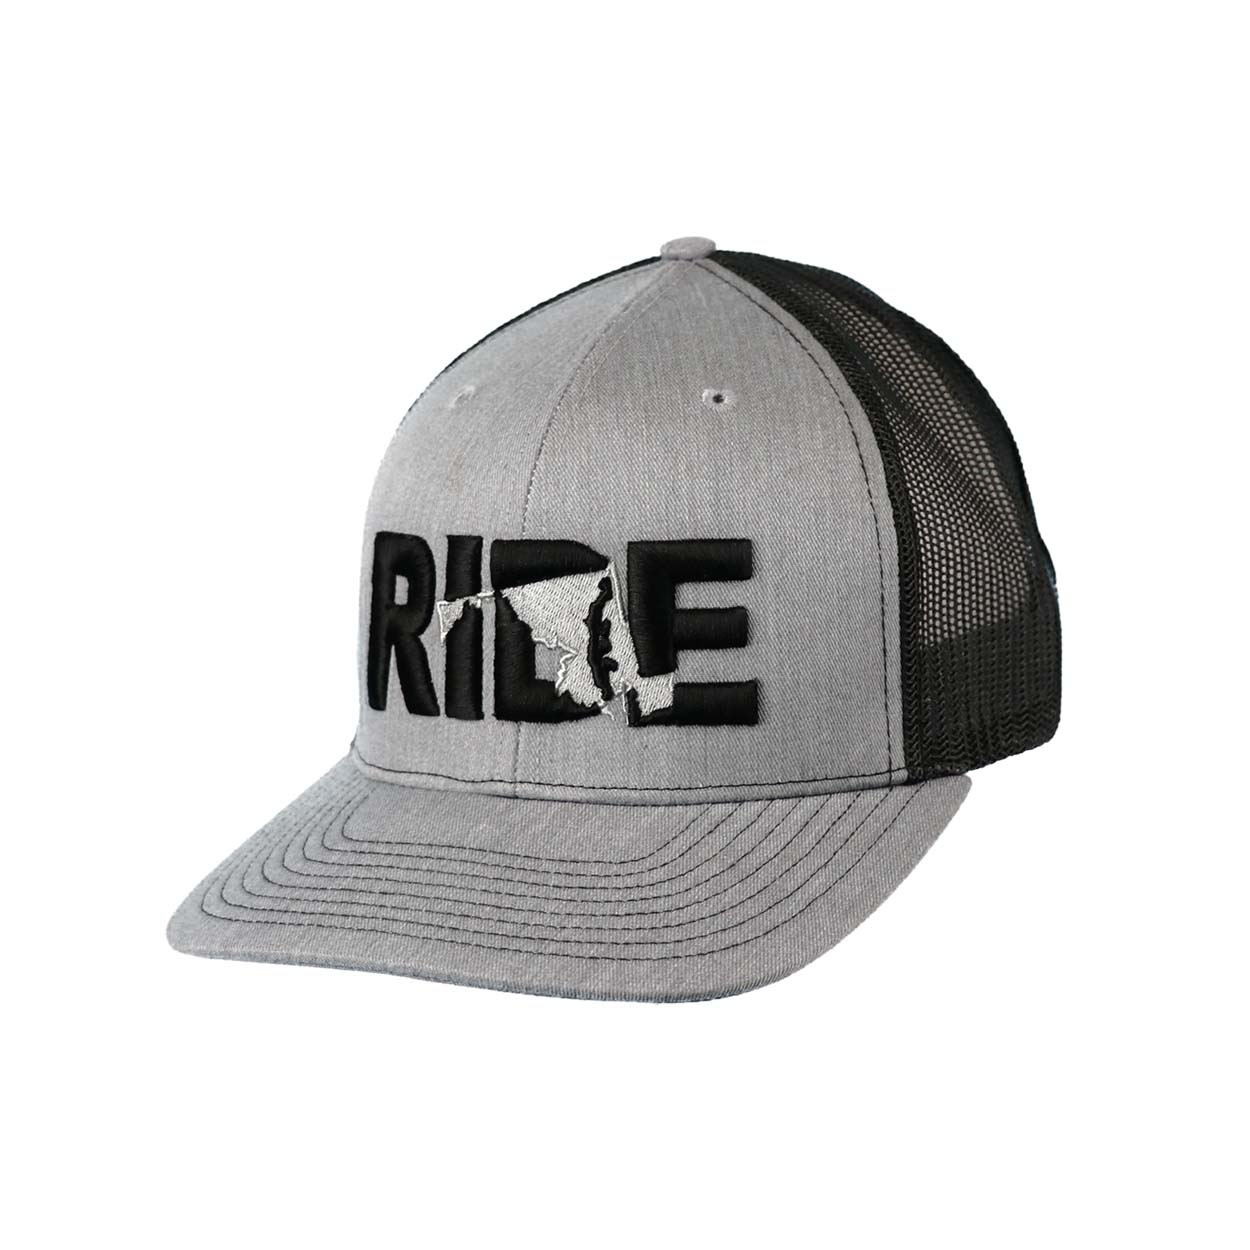 Ride Maryland Classic Pro 3D Puff Embroidered Snapback Trucker Hat Heather Gray/Black